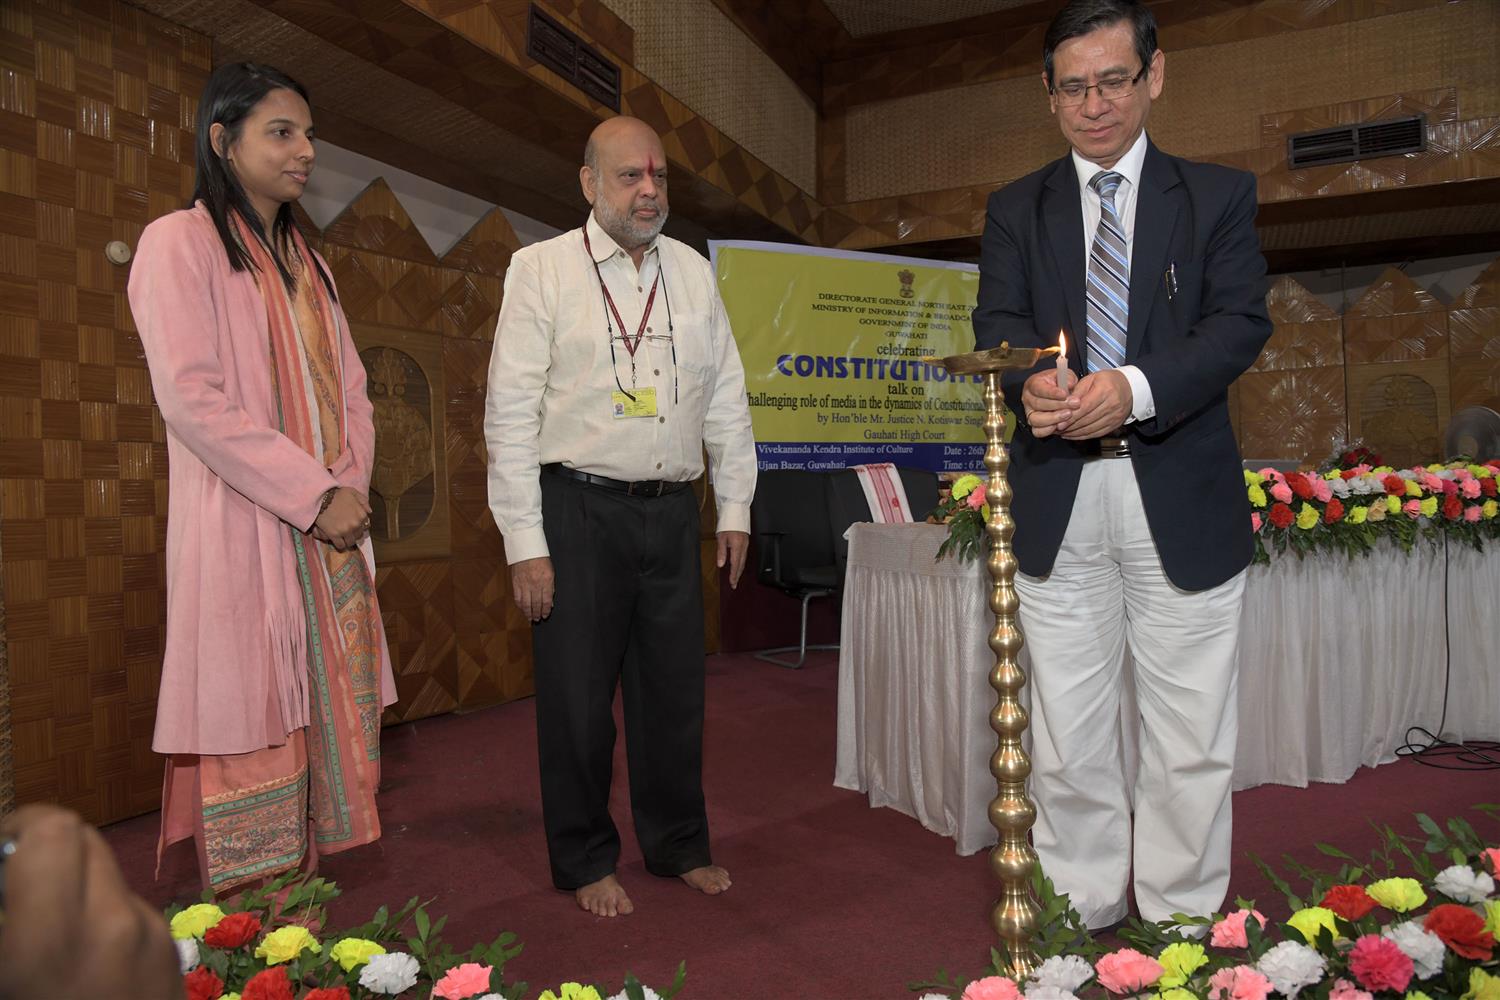 JUSTICE GUWAHATI HIGH COURT SHRI KOTISWAR SINGH LIGHTING LAMP TO INAUGURATE   70TH CONSTITUTION DAY “CHALLENGING ROLE OF MEDIA IN THE DYNAMICS OF CONSTITUTIONAL CHANGES IN INDIA” BY REGIONAL OUTREACH BUREAU MINISTRY OF INFORMATION & BROADCASTING, RGUWAHATI ON 26TH NOVEMBER 2019 AT GUWAHATI.  SHRI L R VISHWANATH, DIRECTOR GENERAL, MINISTRY OF INFORMATION & BROADCASTING, SMT. KEERTI TEWARI, JOINT DIRECTOR, PIB GUWAHATI AND DR. A. M FAROOQI, DEPUTY DIRECTOR, ROB GUWAHATI ARE ALSO SEEN IN THE PICTURE.